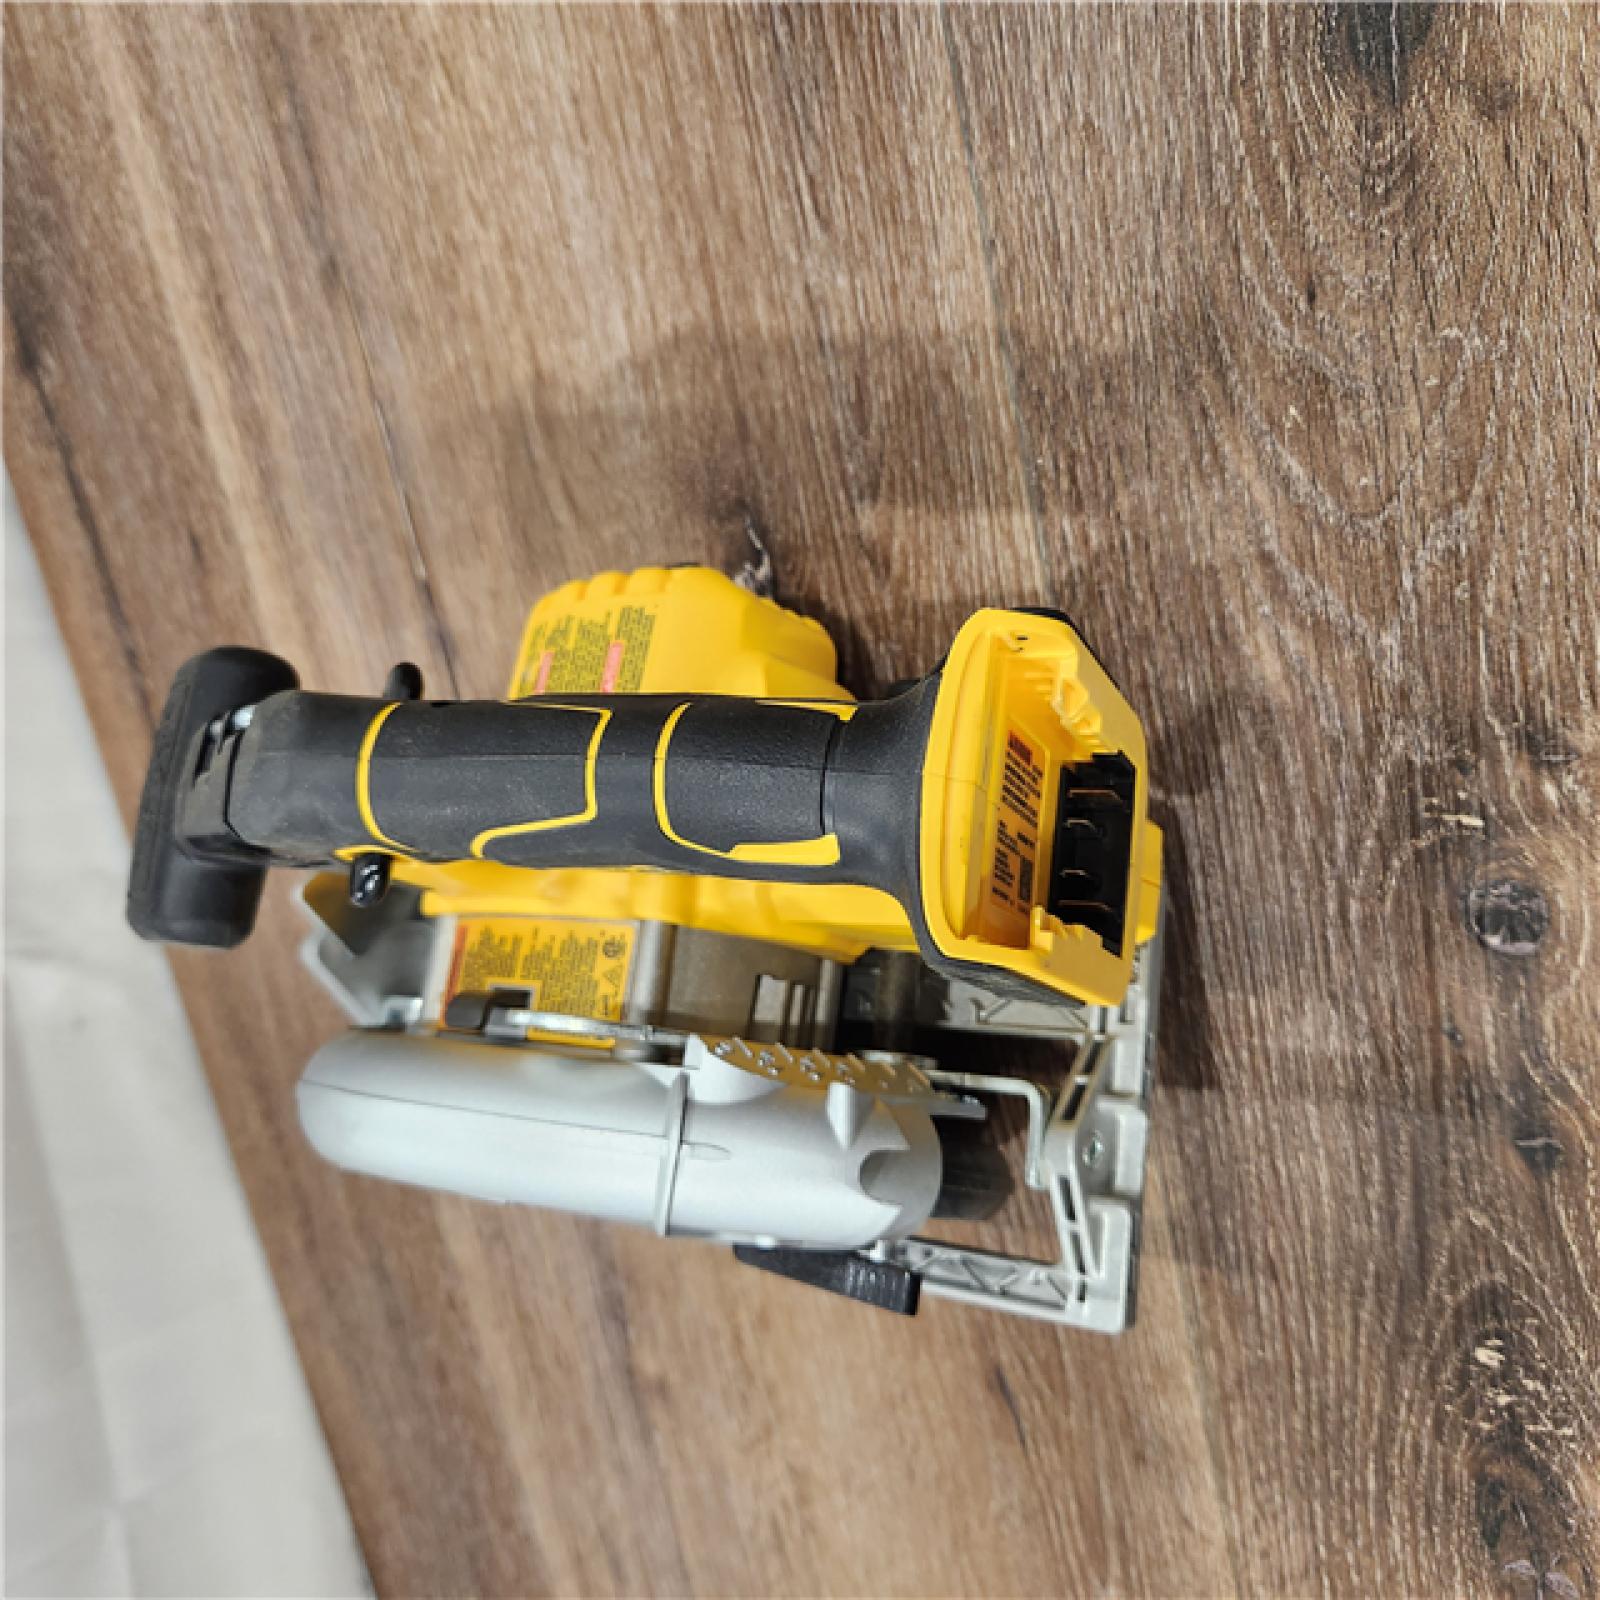 AS-IS DeWALT DCS565B 20V Max Brushless 6.5   Cordless Circular Saw NOT INCLUDED CHARGE AND BATTERY